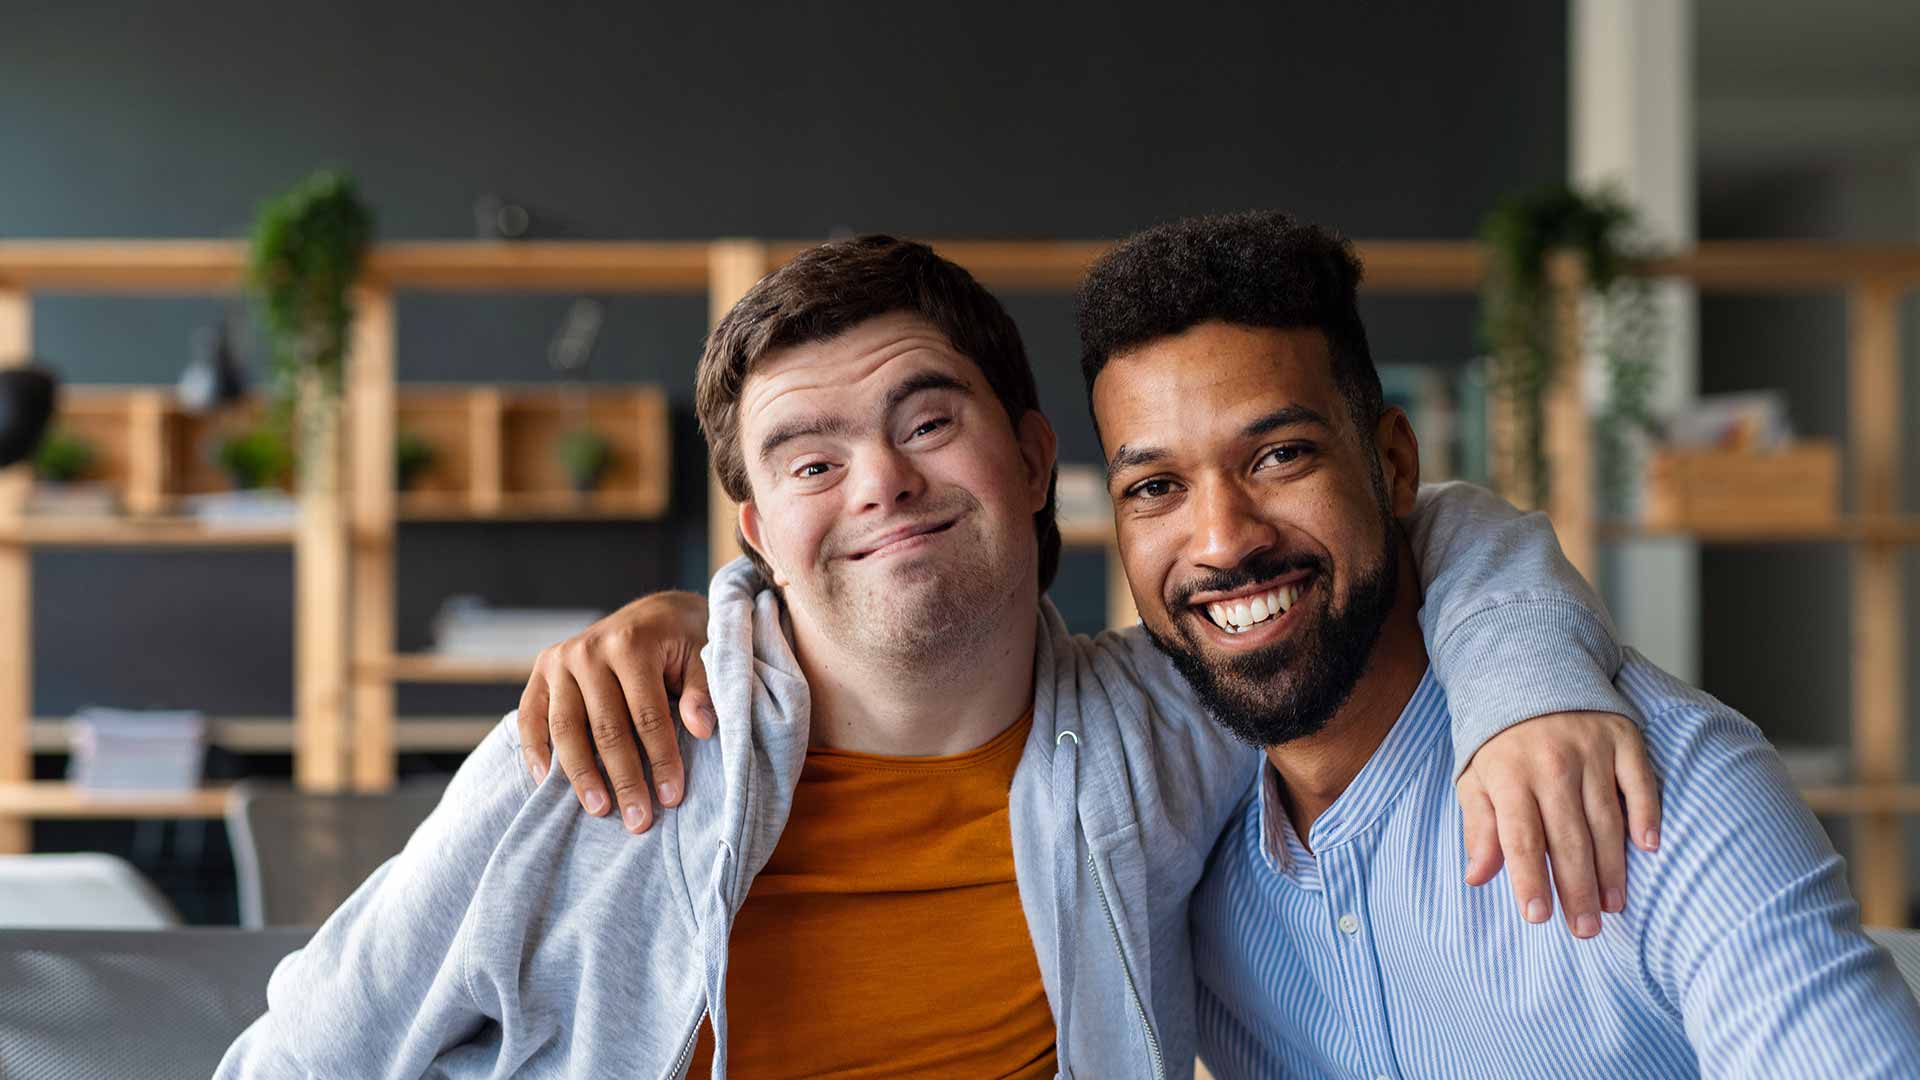 Unregistered NDIS Providers: A man with downs syndrome and a support worker smile at the camera with arms around each other